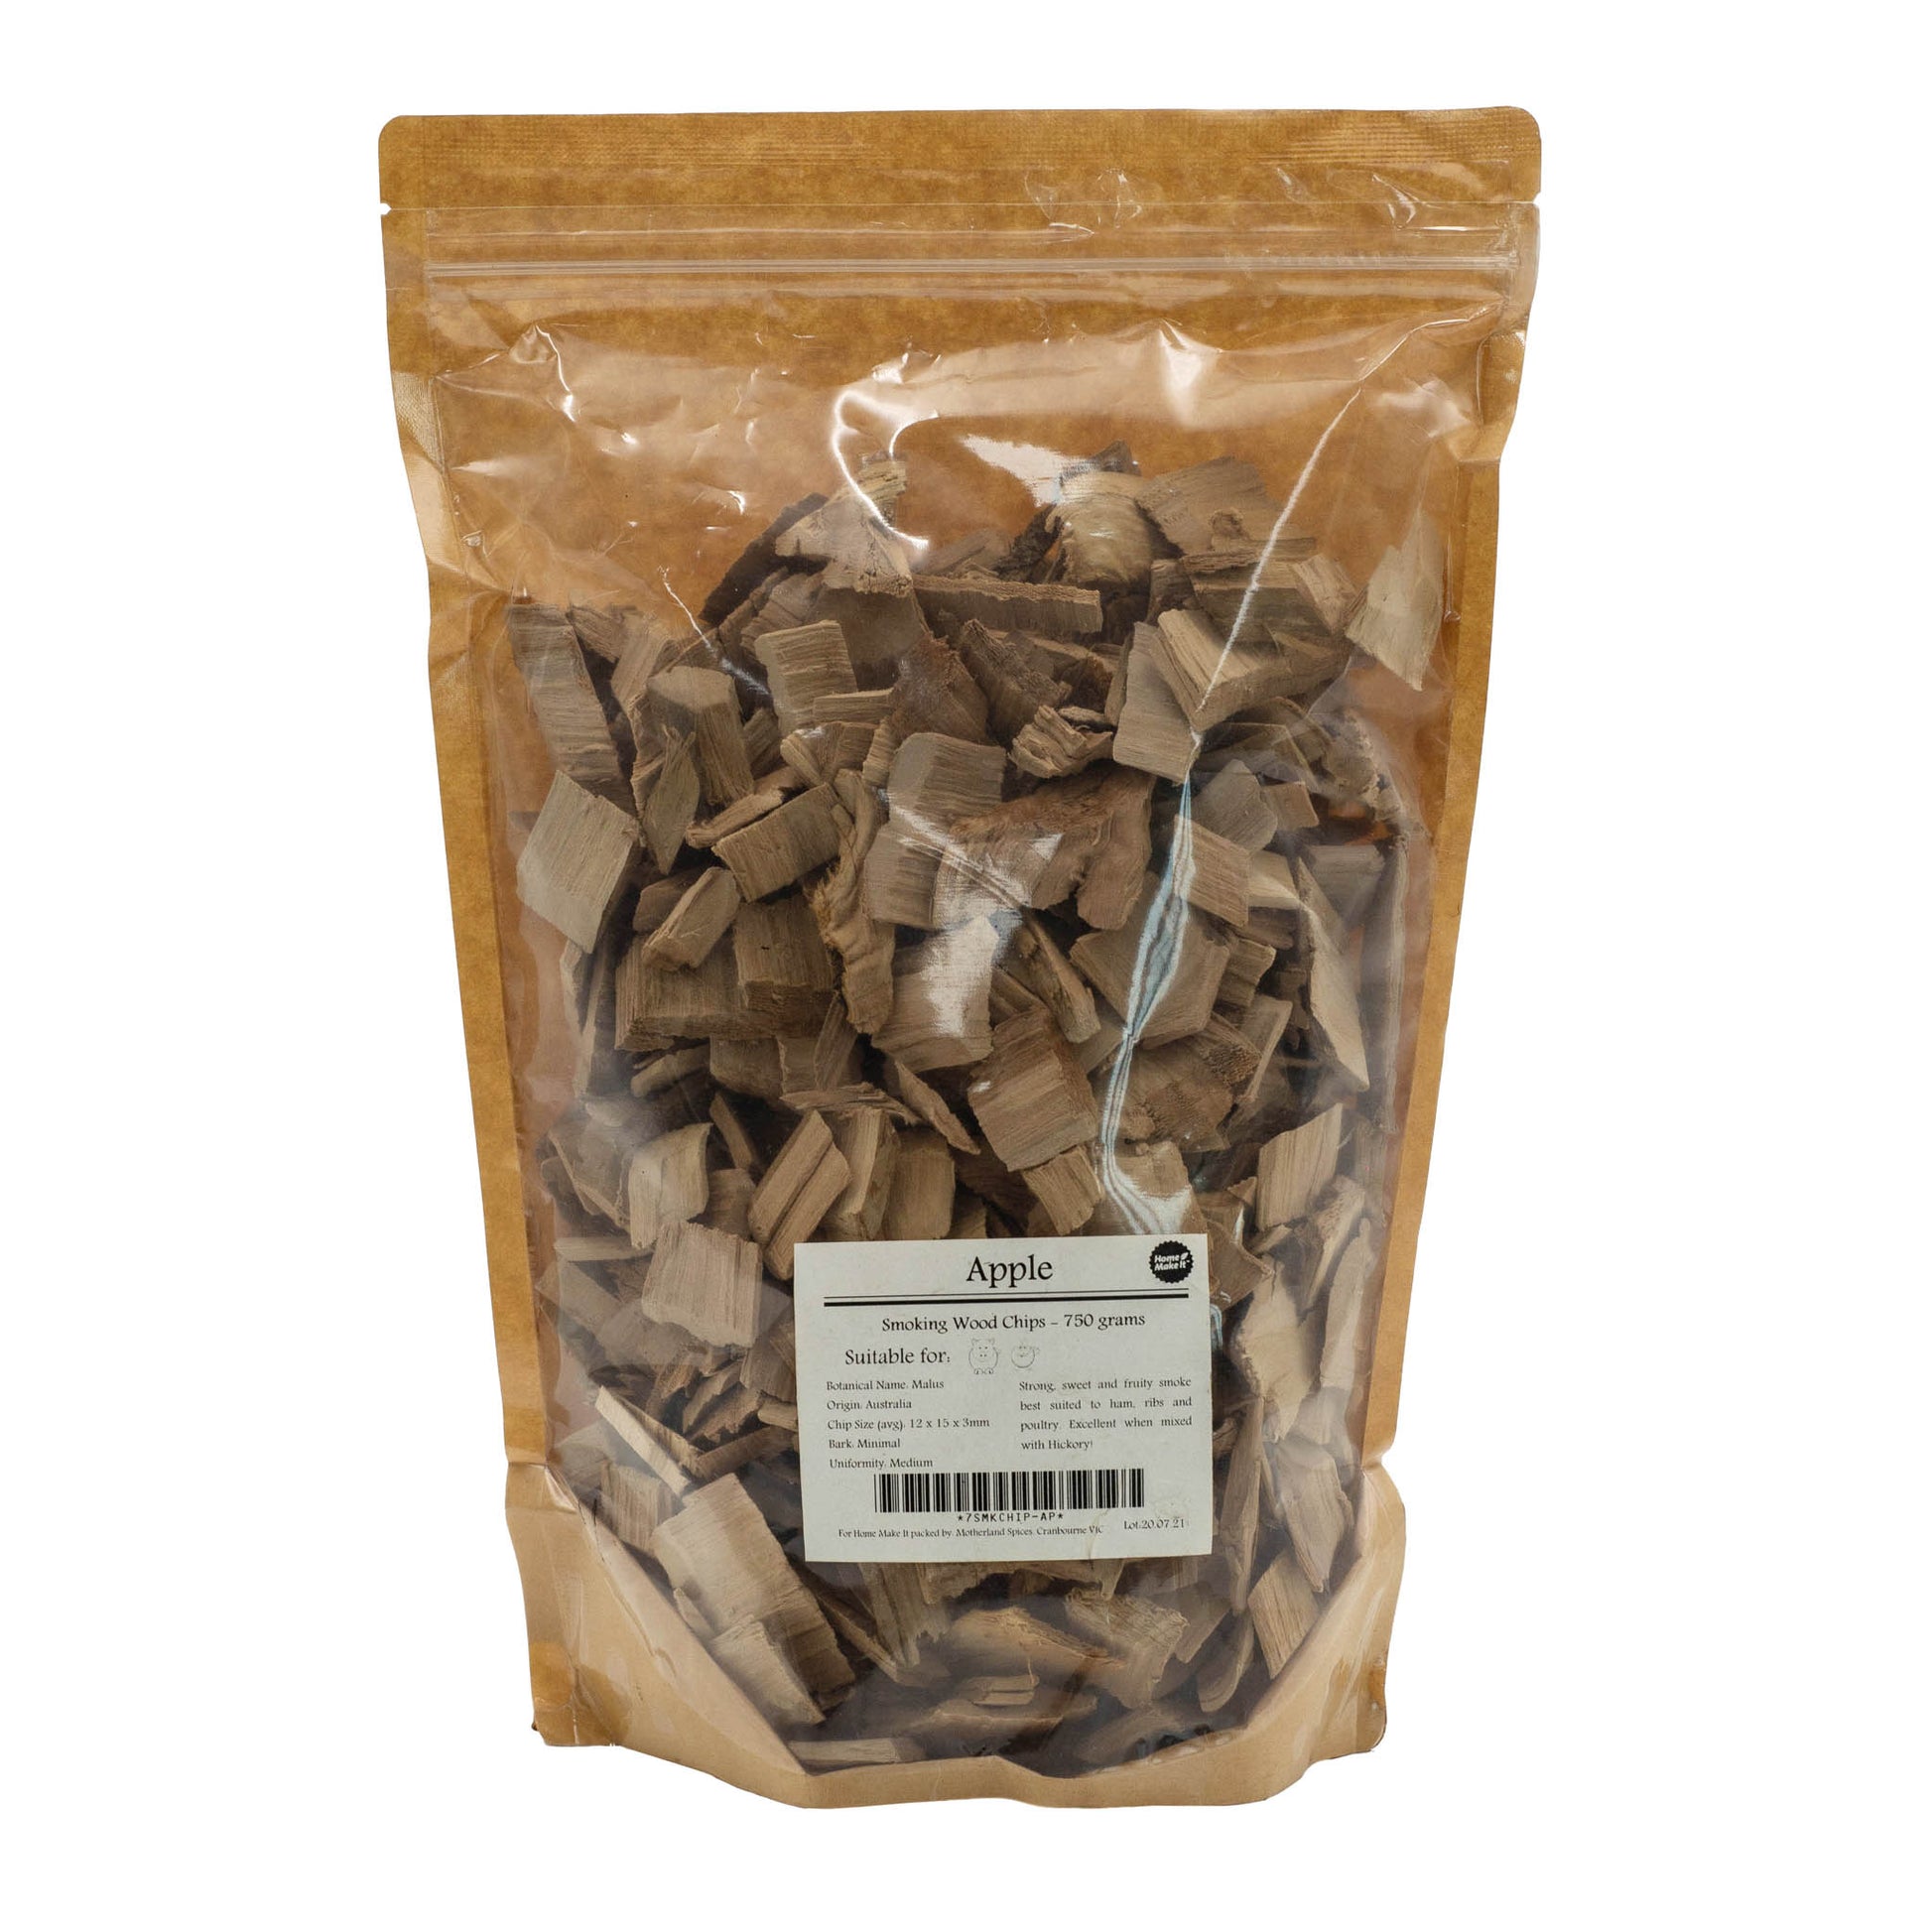 750 gram bag of Apple wood smoking chips. Strong, sweet fruity smoke best for ham, ribs and poultry. 